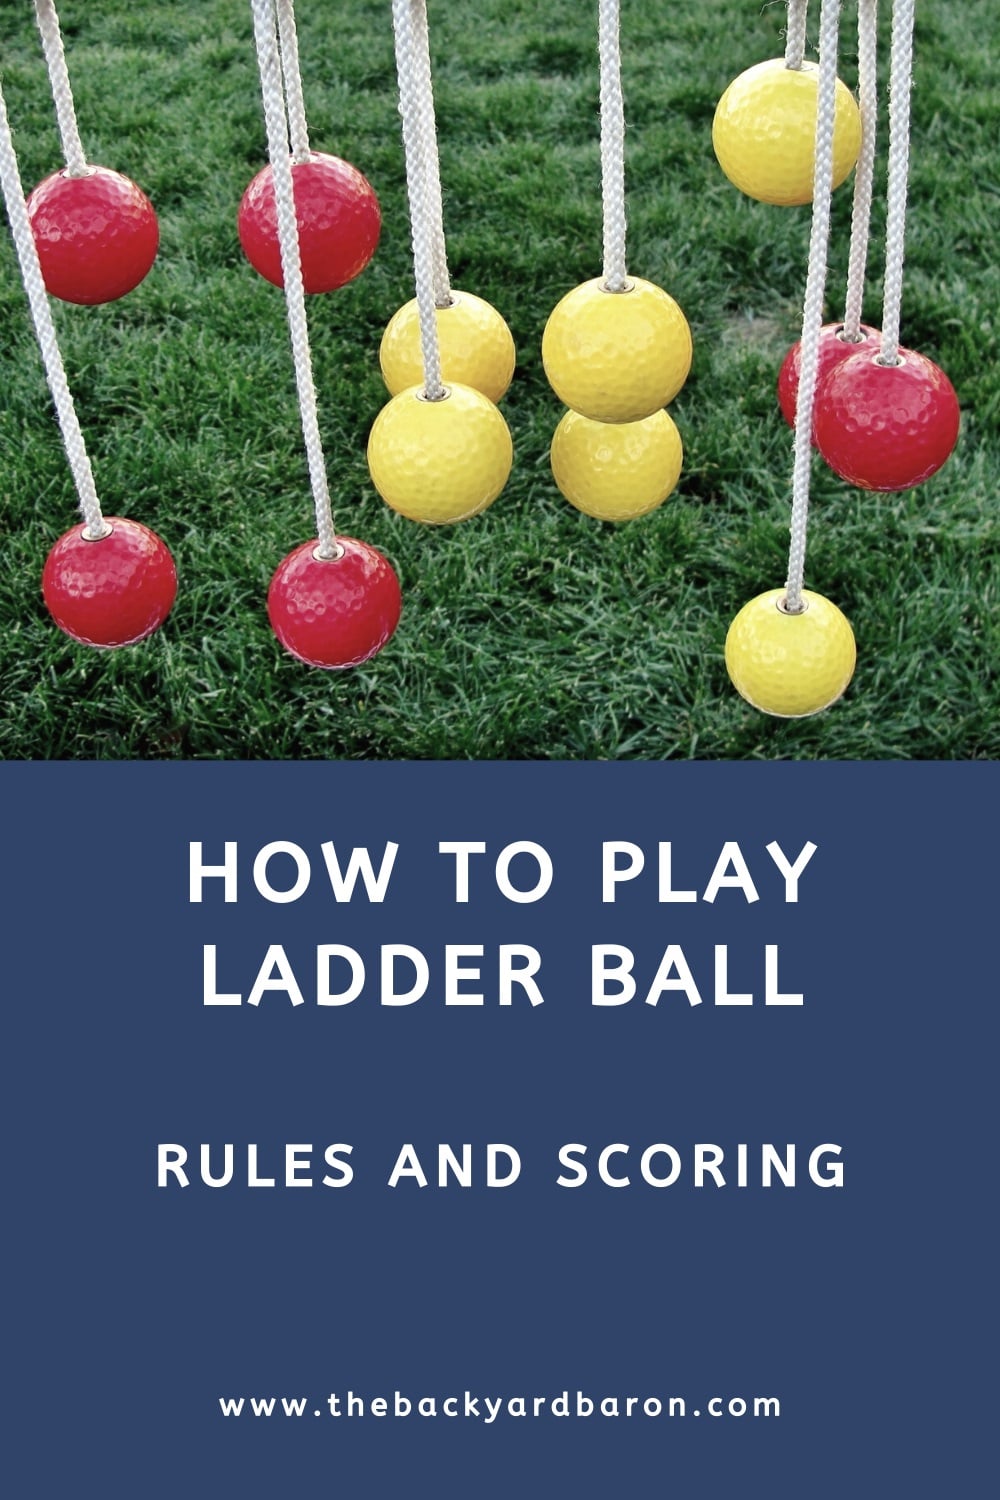 How to play ladder ball (beginners guide)